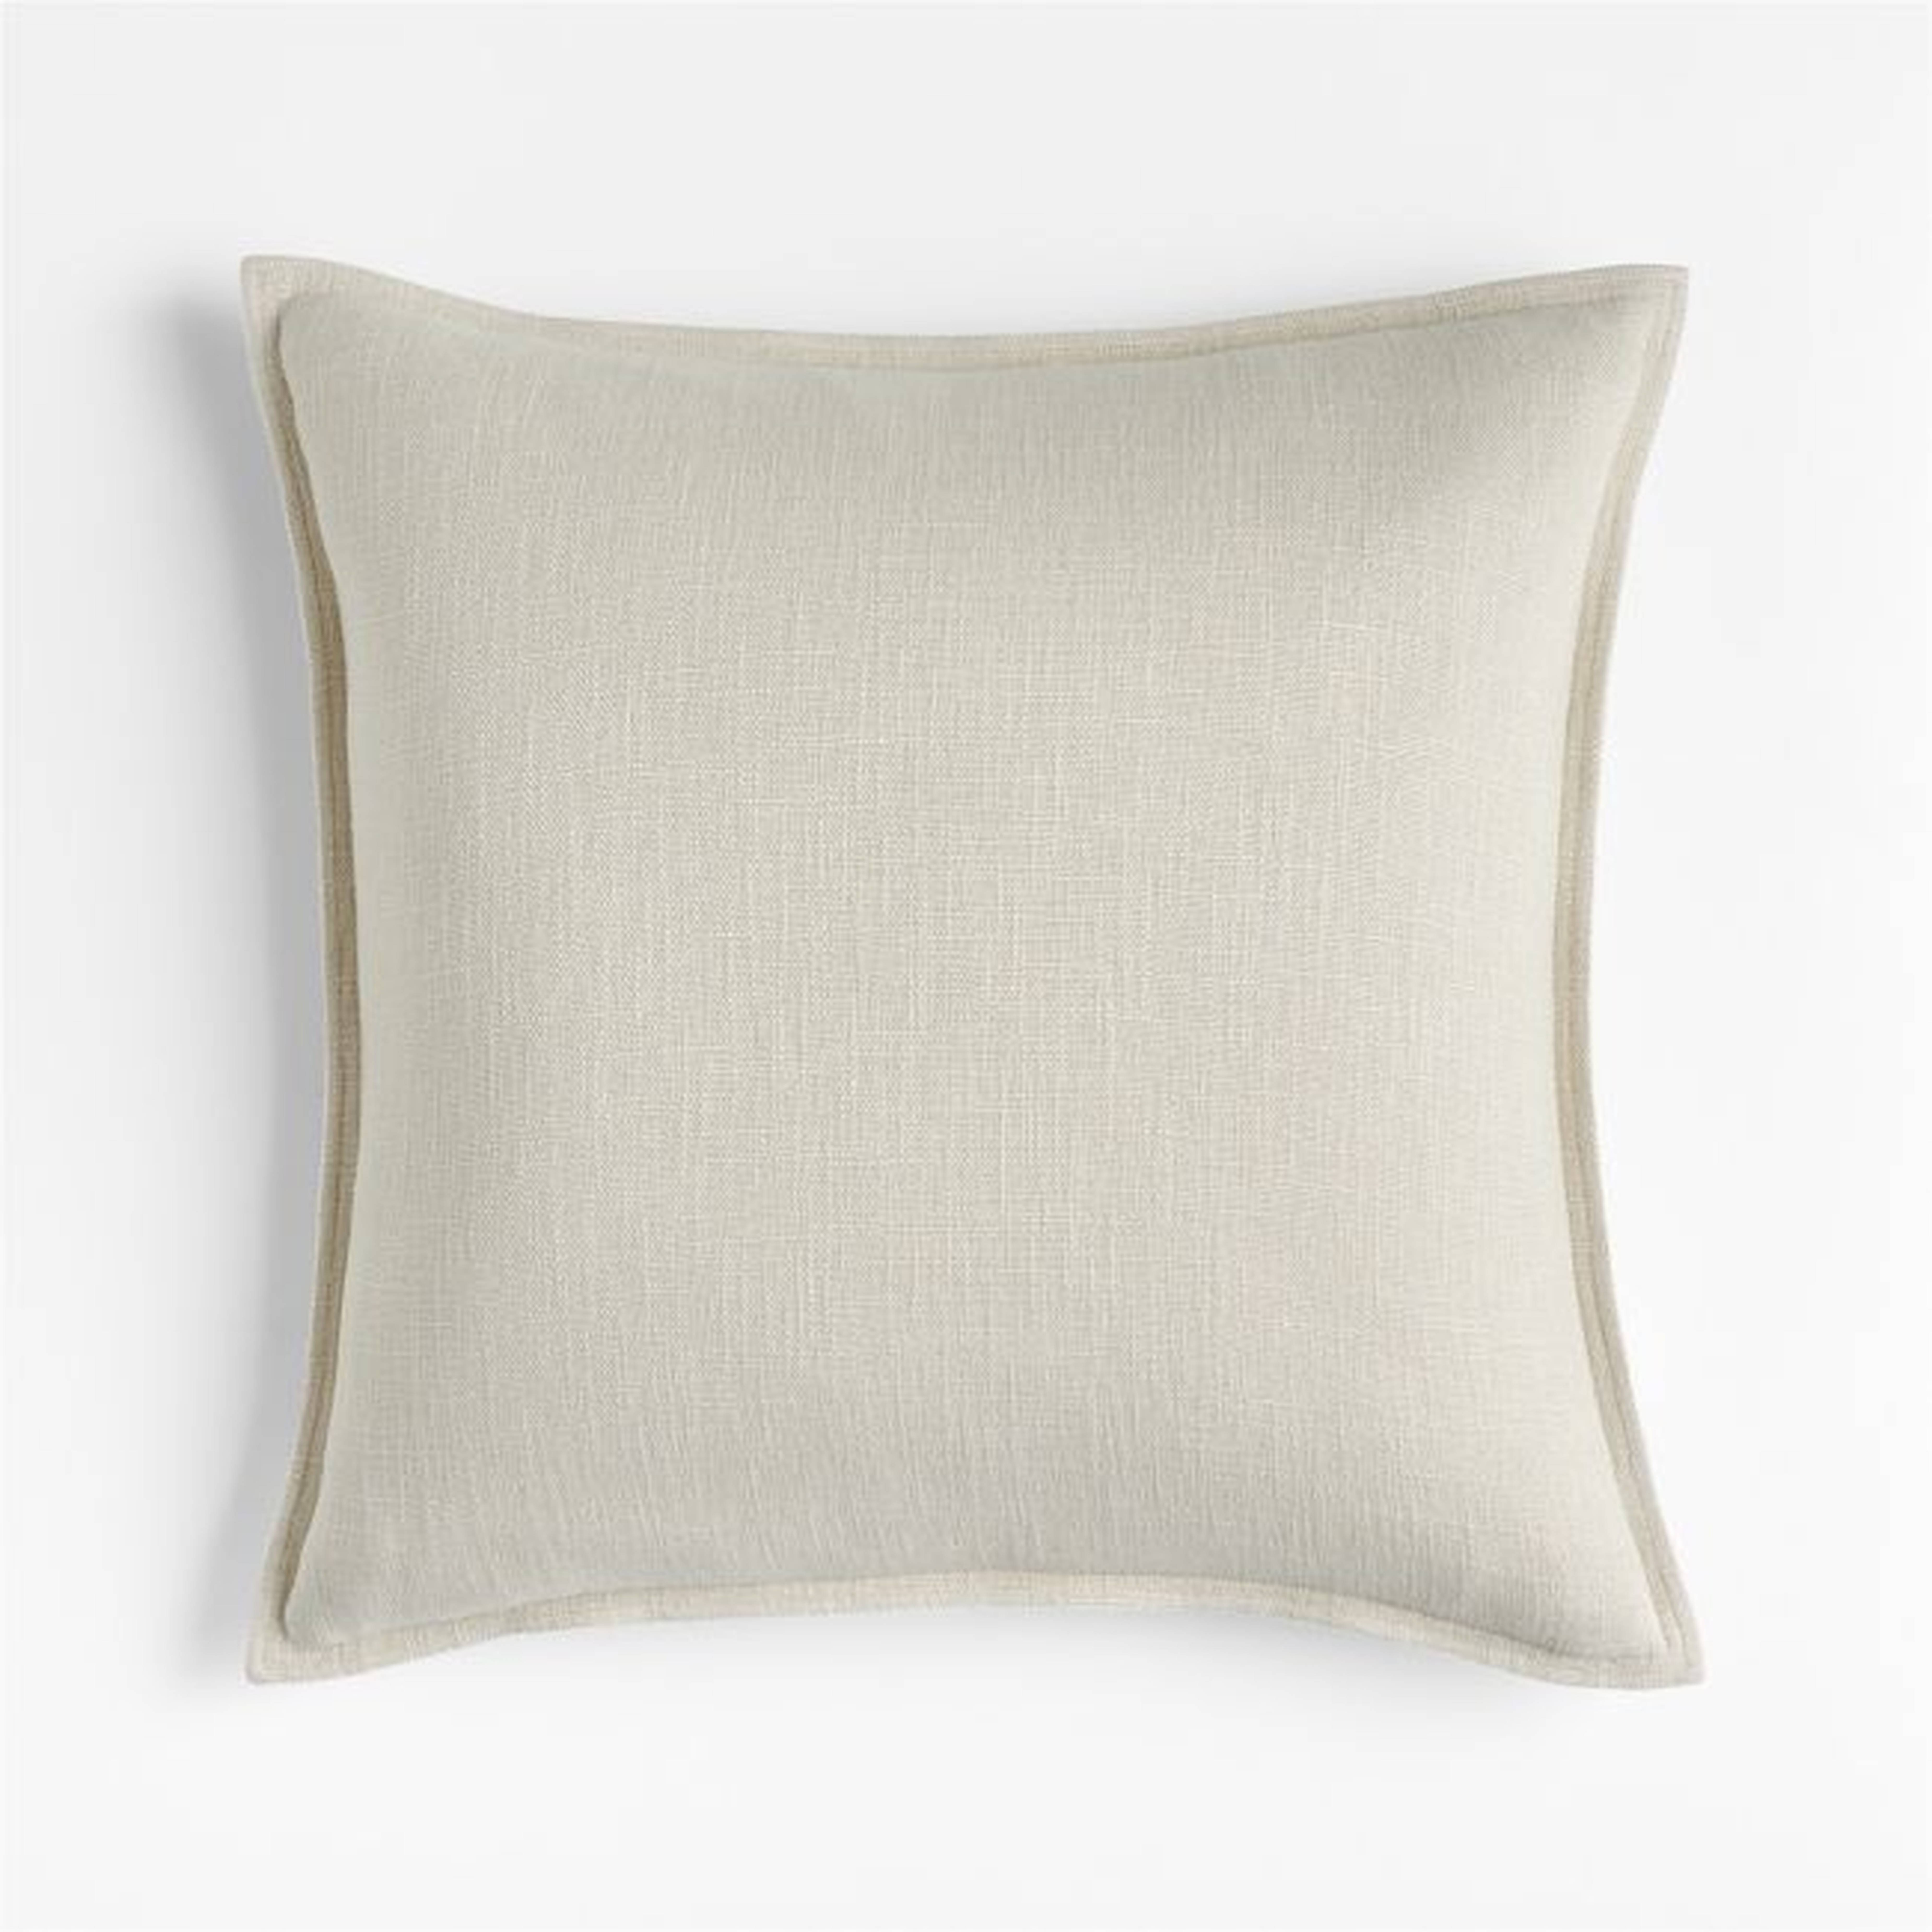 Ivory 20"x20" Laundered Linen Throw Pillow with Down-Alternative Insert - Crate and Barrel